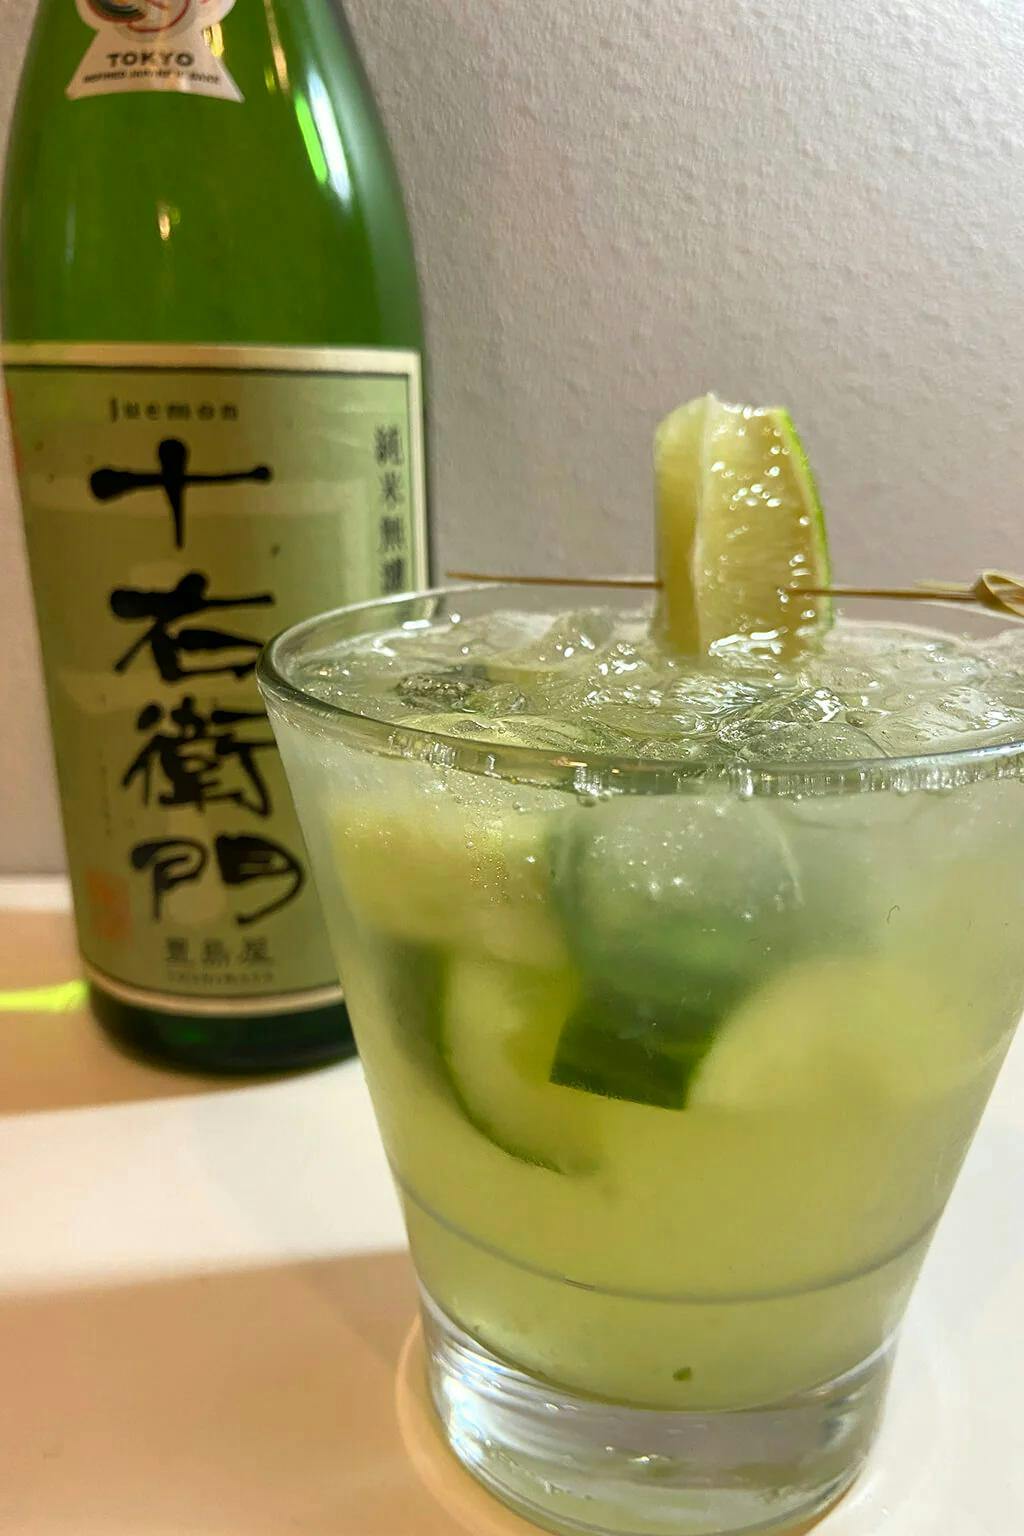 The cucumber shisojito is a refreshing cocktail